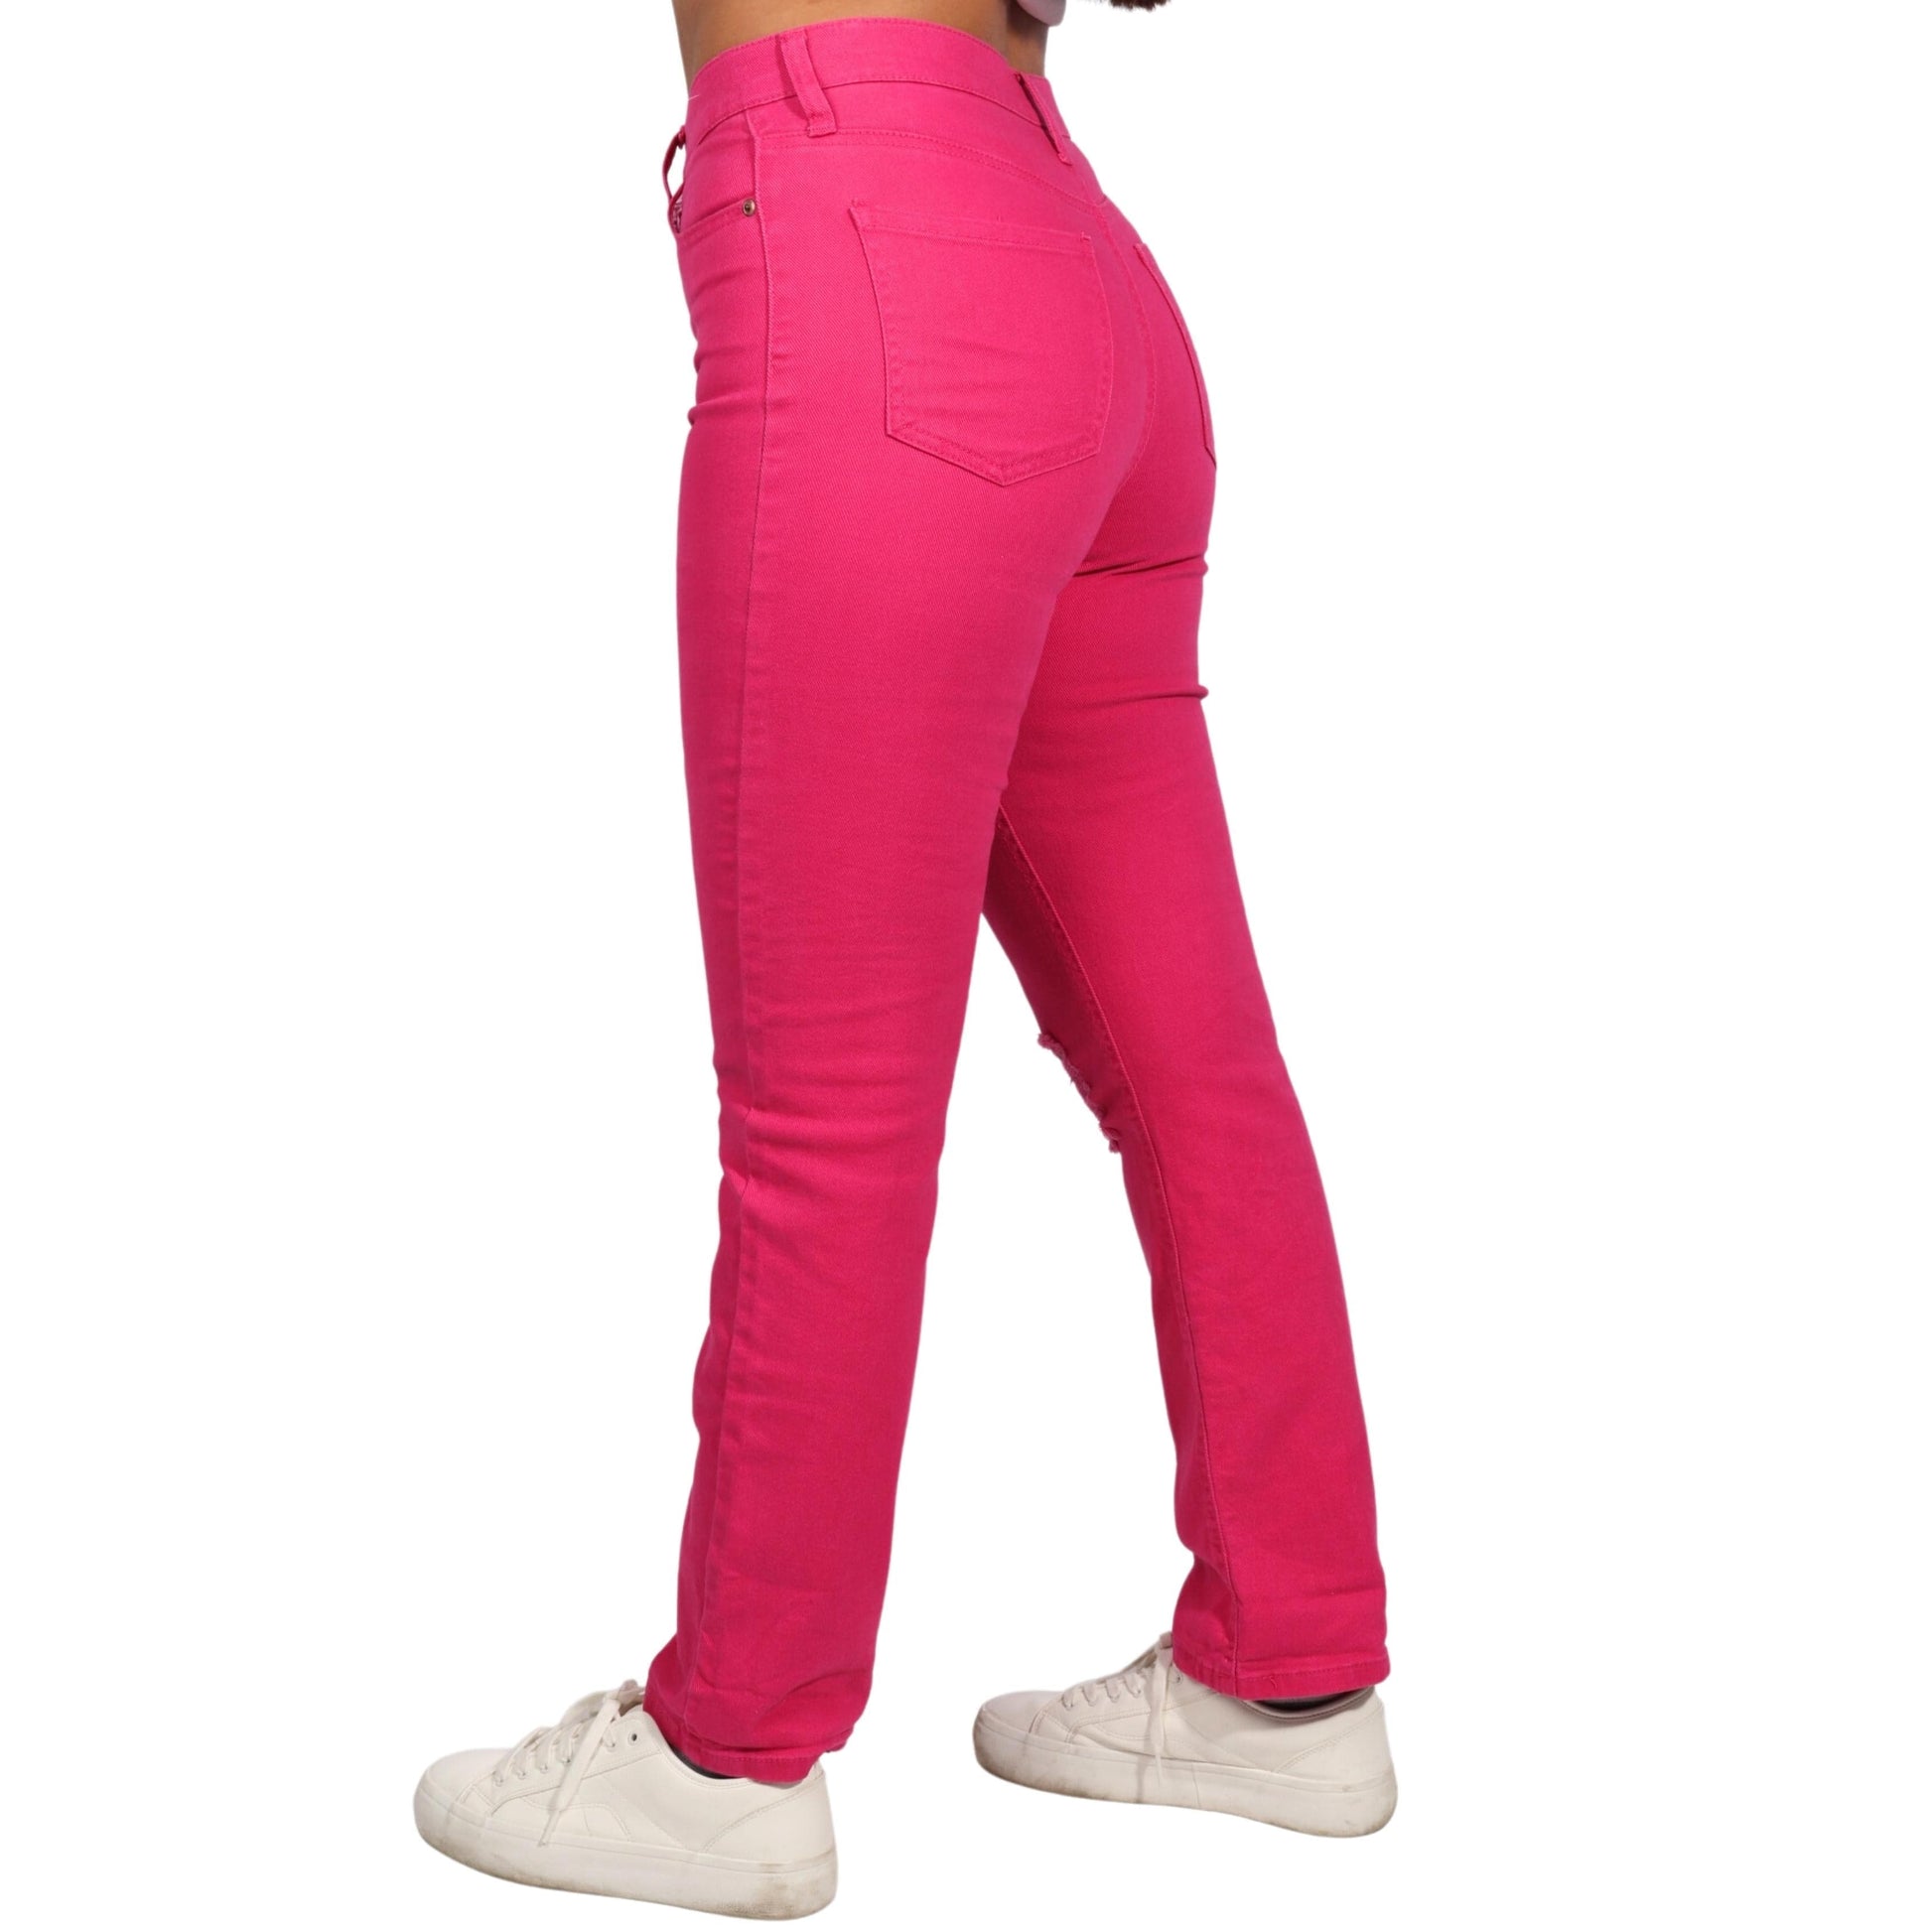 CELEBRITY PINK Womens Bottoms M / Pink CELEBRITY PINK - Style Women's Jeans